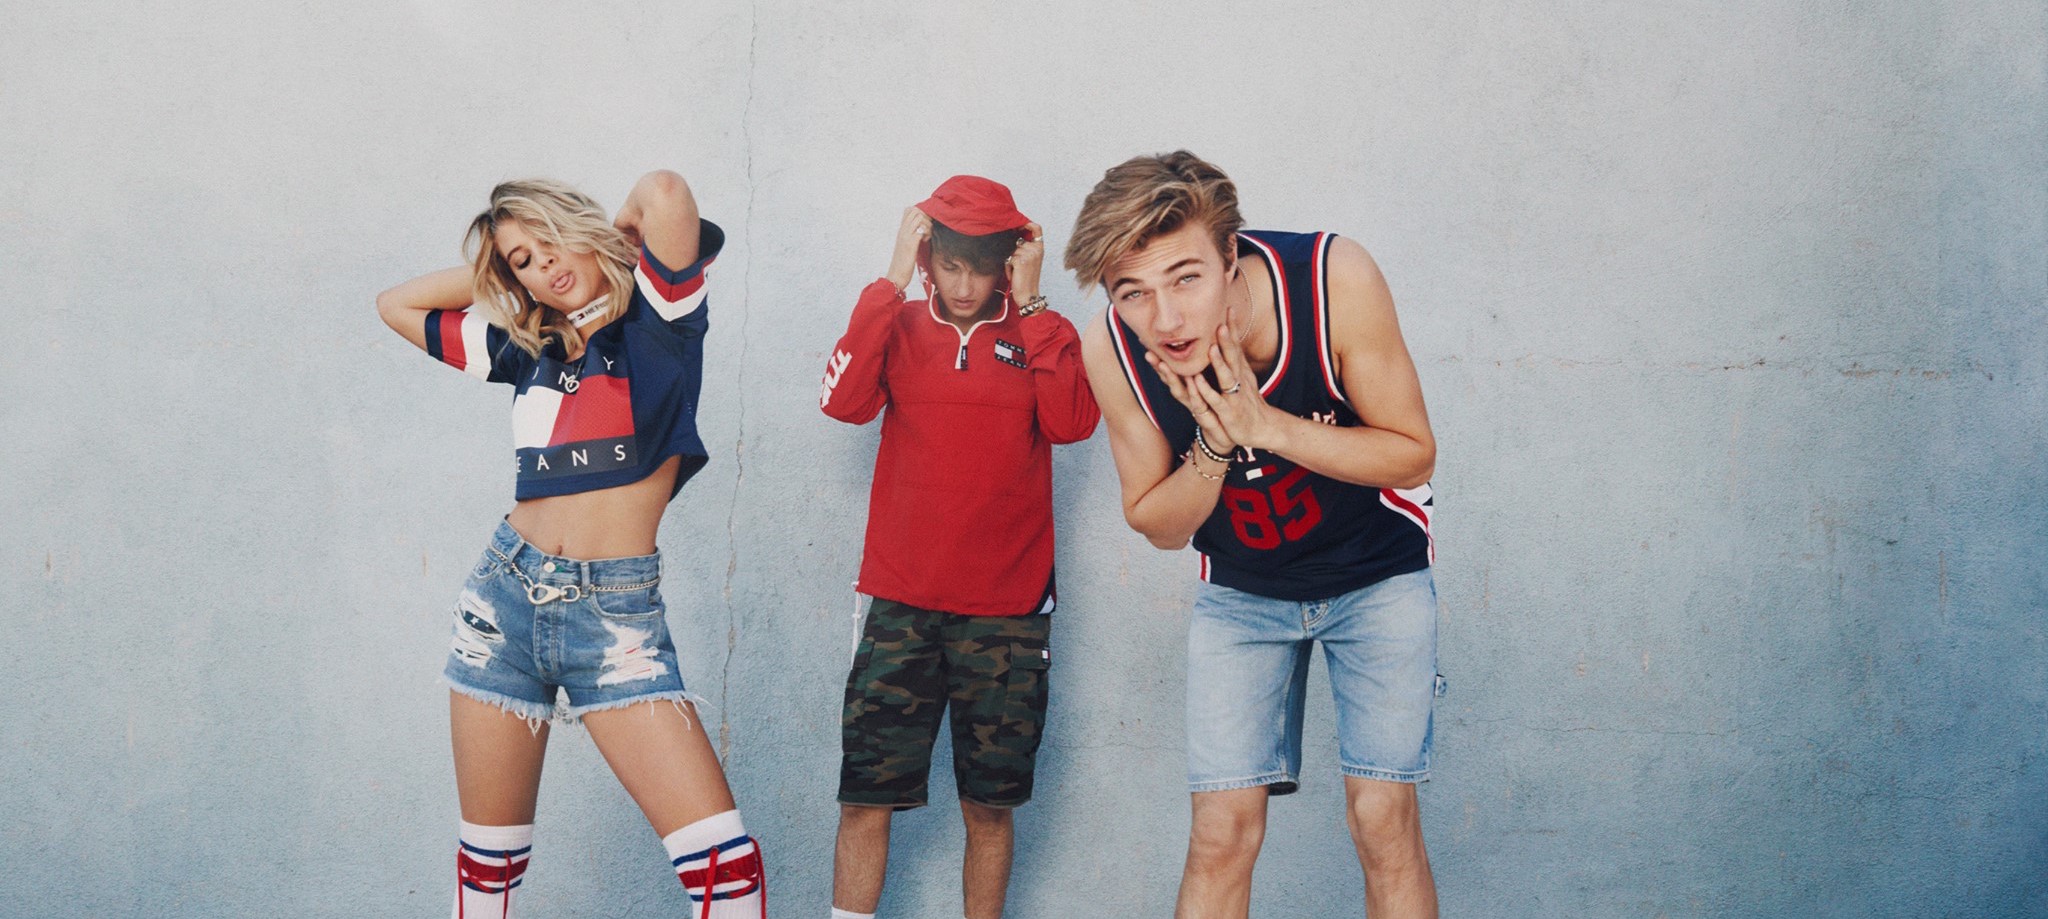 Tommy Hilfiger anchors new habits with - ATOBI